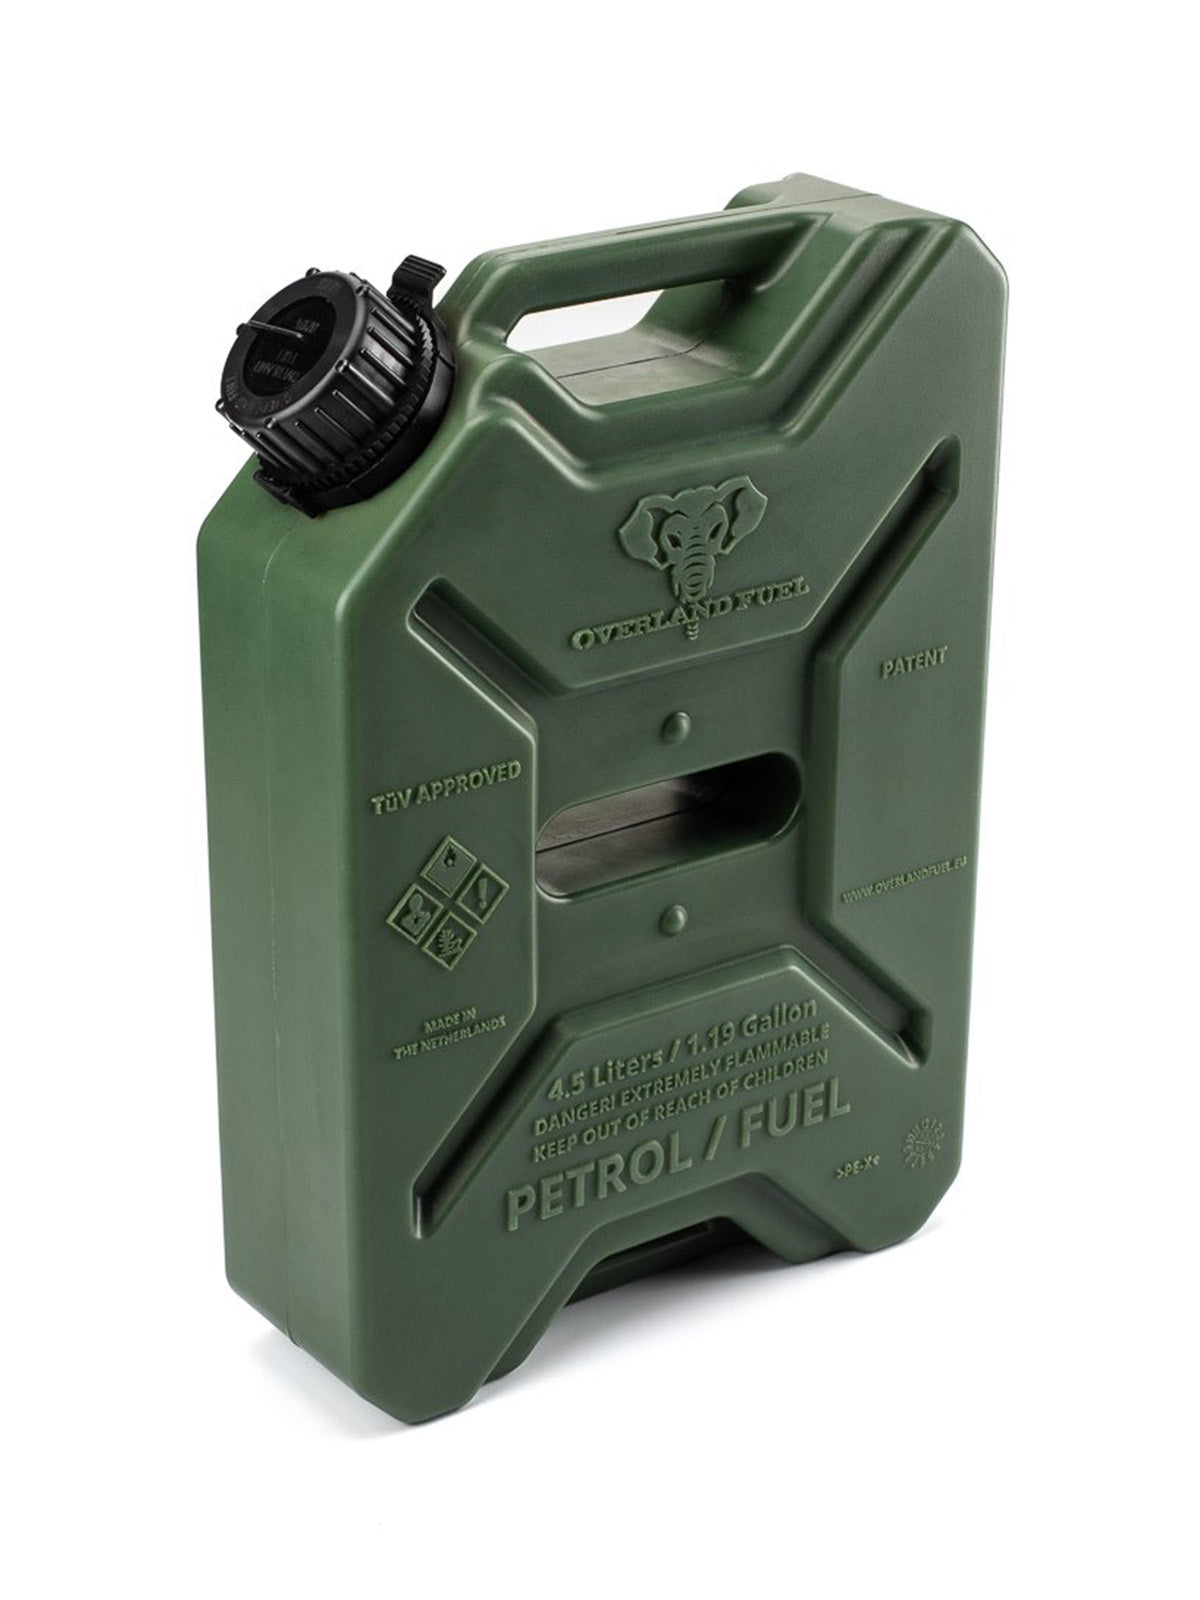 Overland-Fuel 4.5 Litre Fuel Container